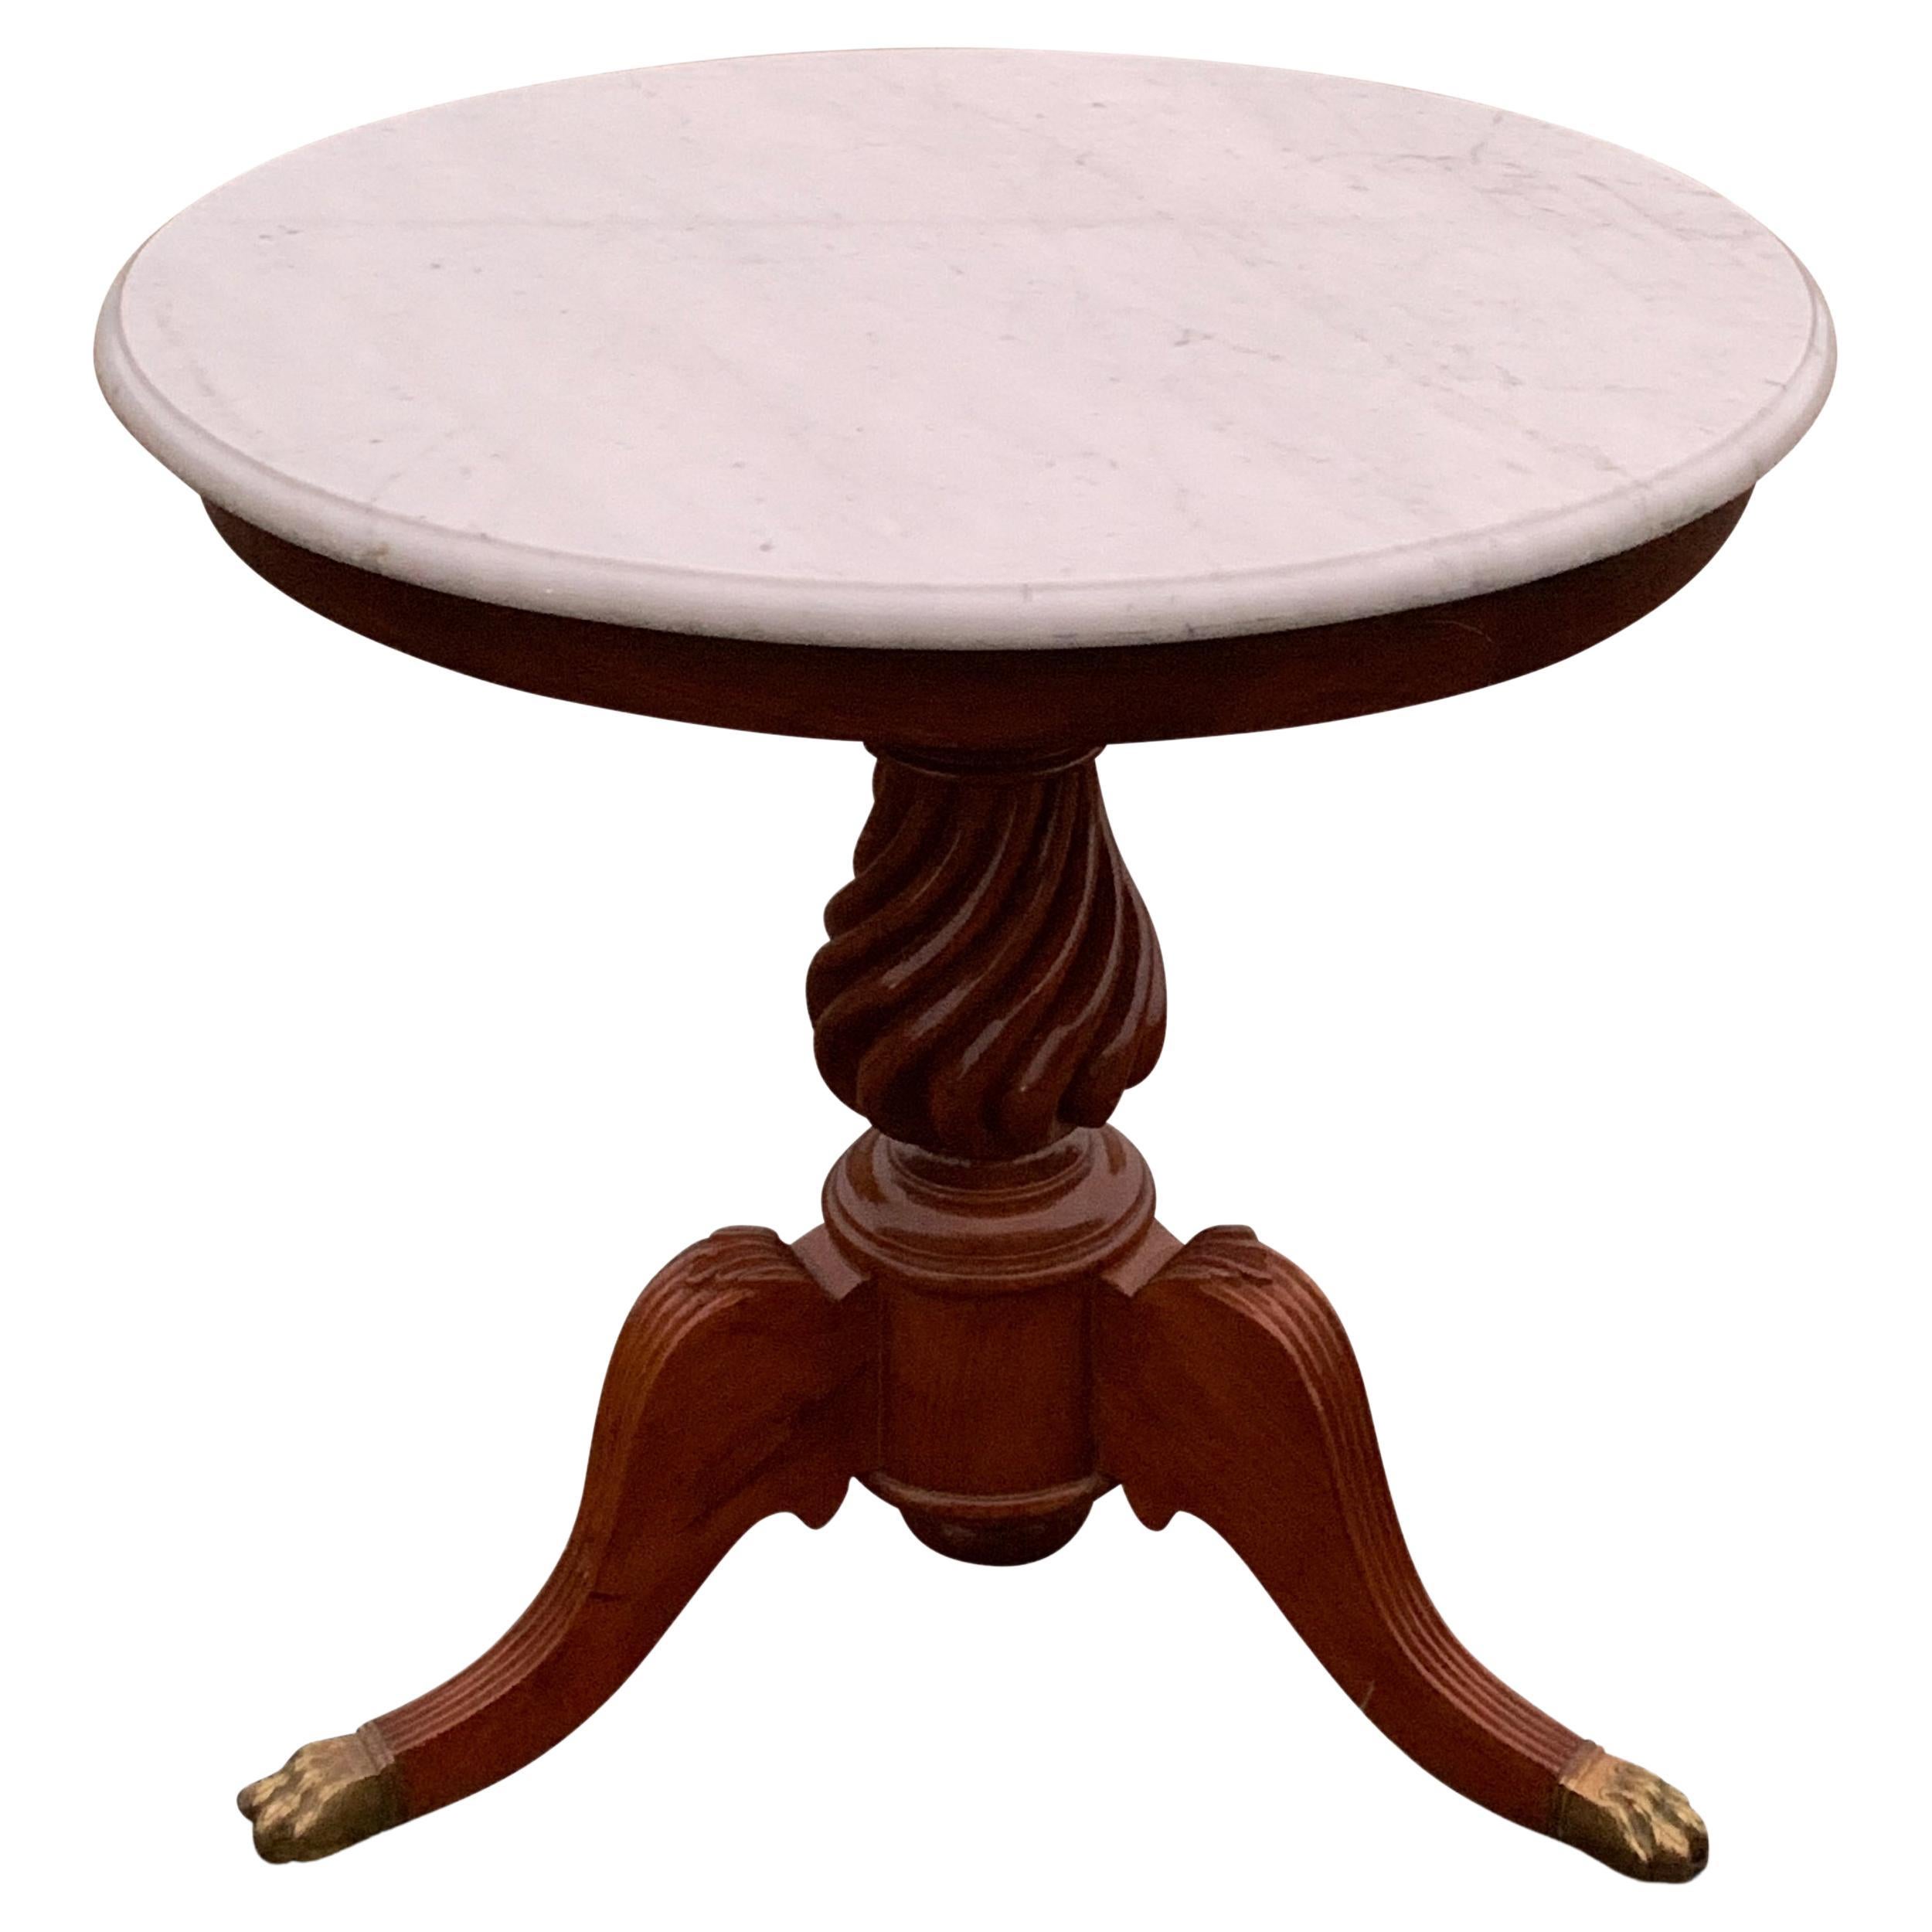 19th Century Marble & Mahogany Gueridon Pedestal Table With Turned Wood Column For Sale